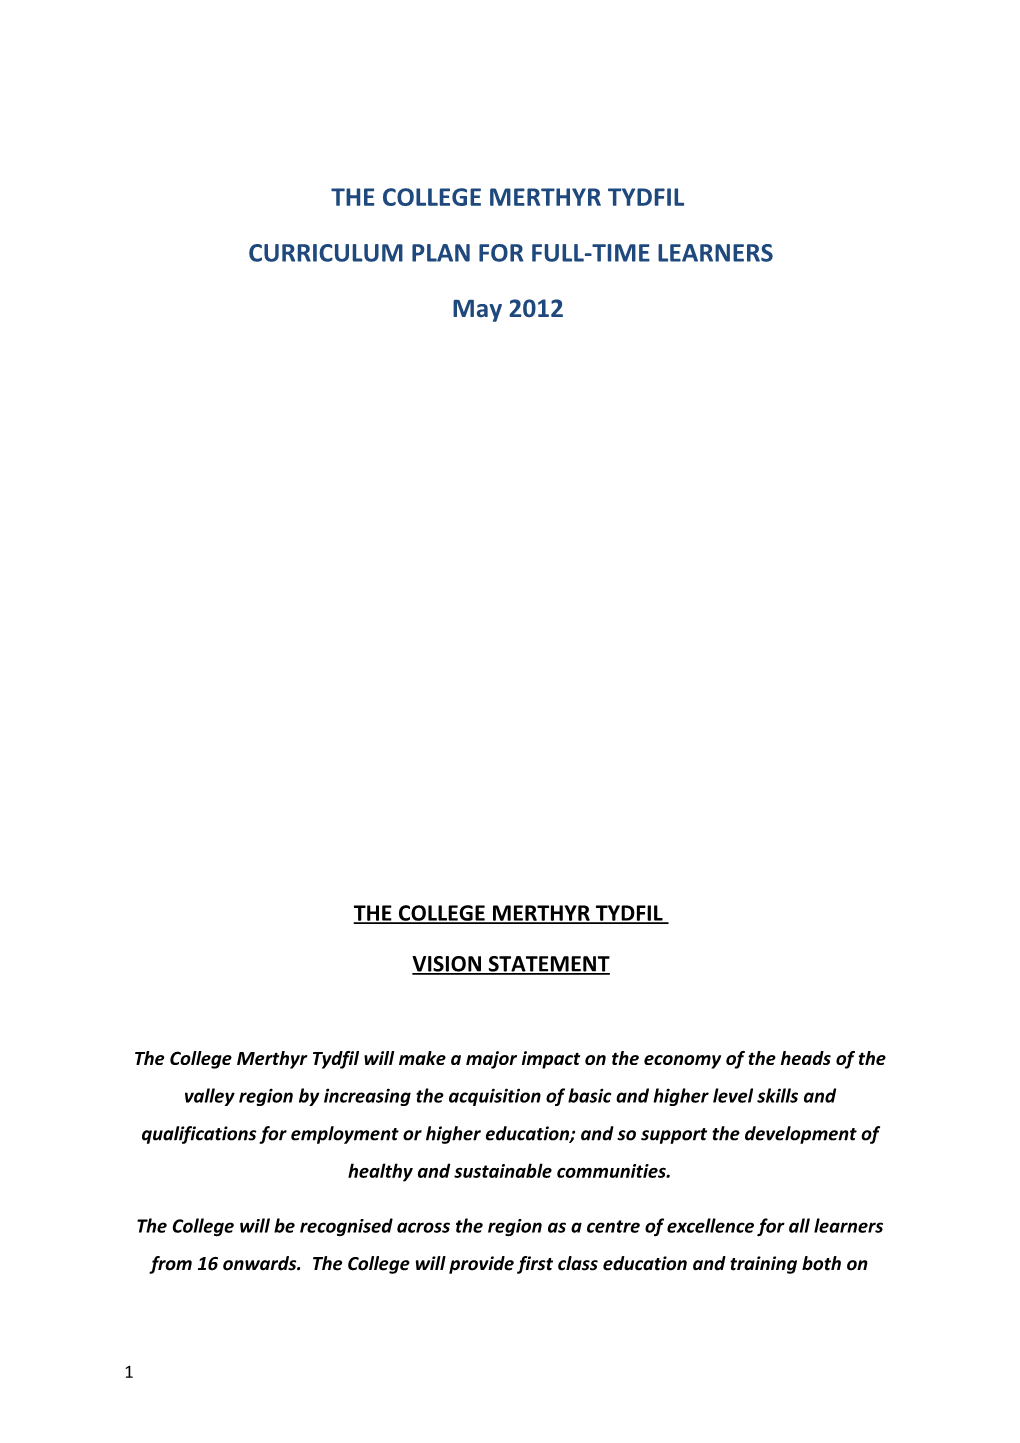 Curriculum Plan for Full-Time Learners